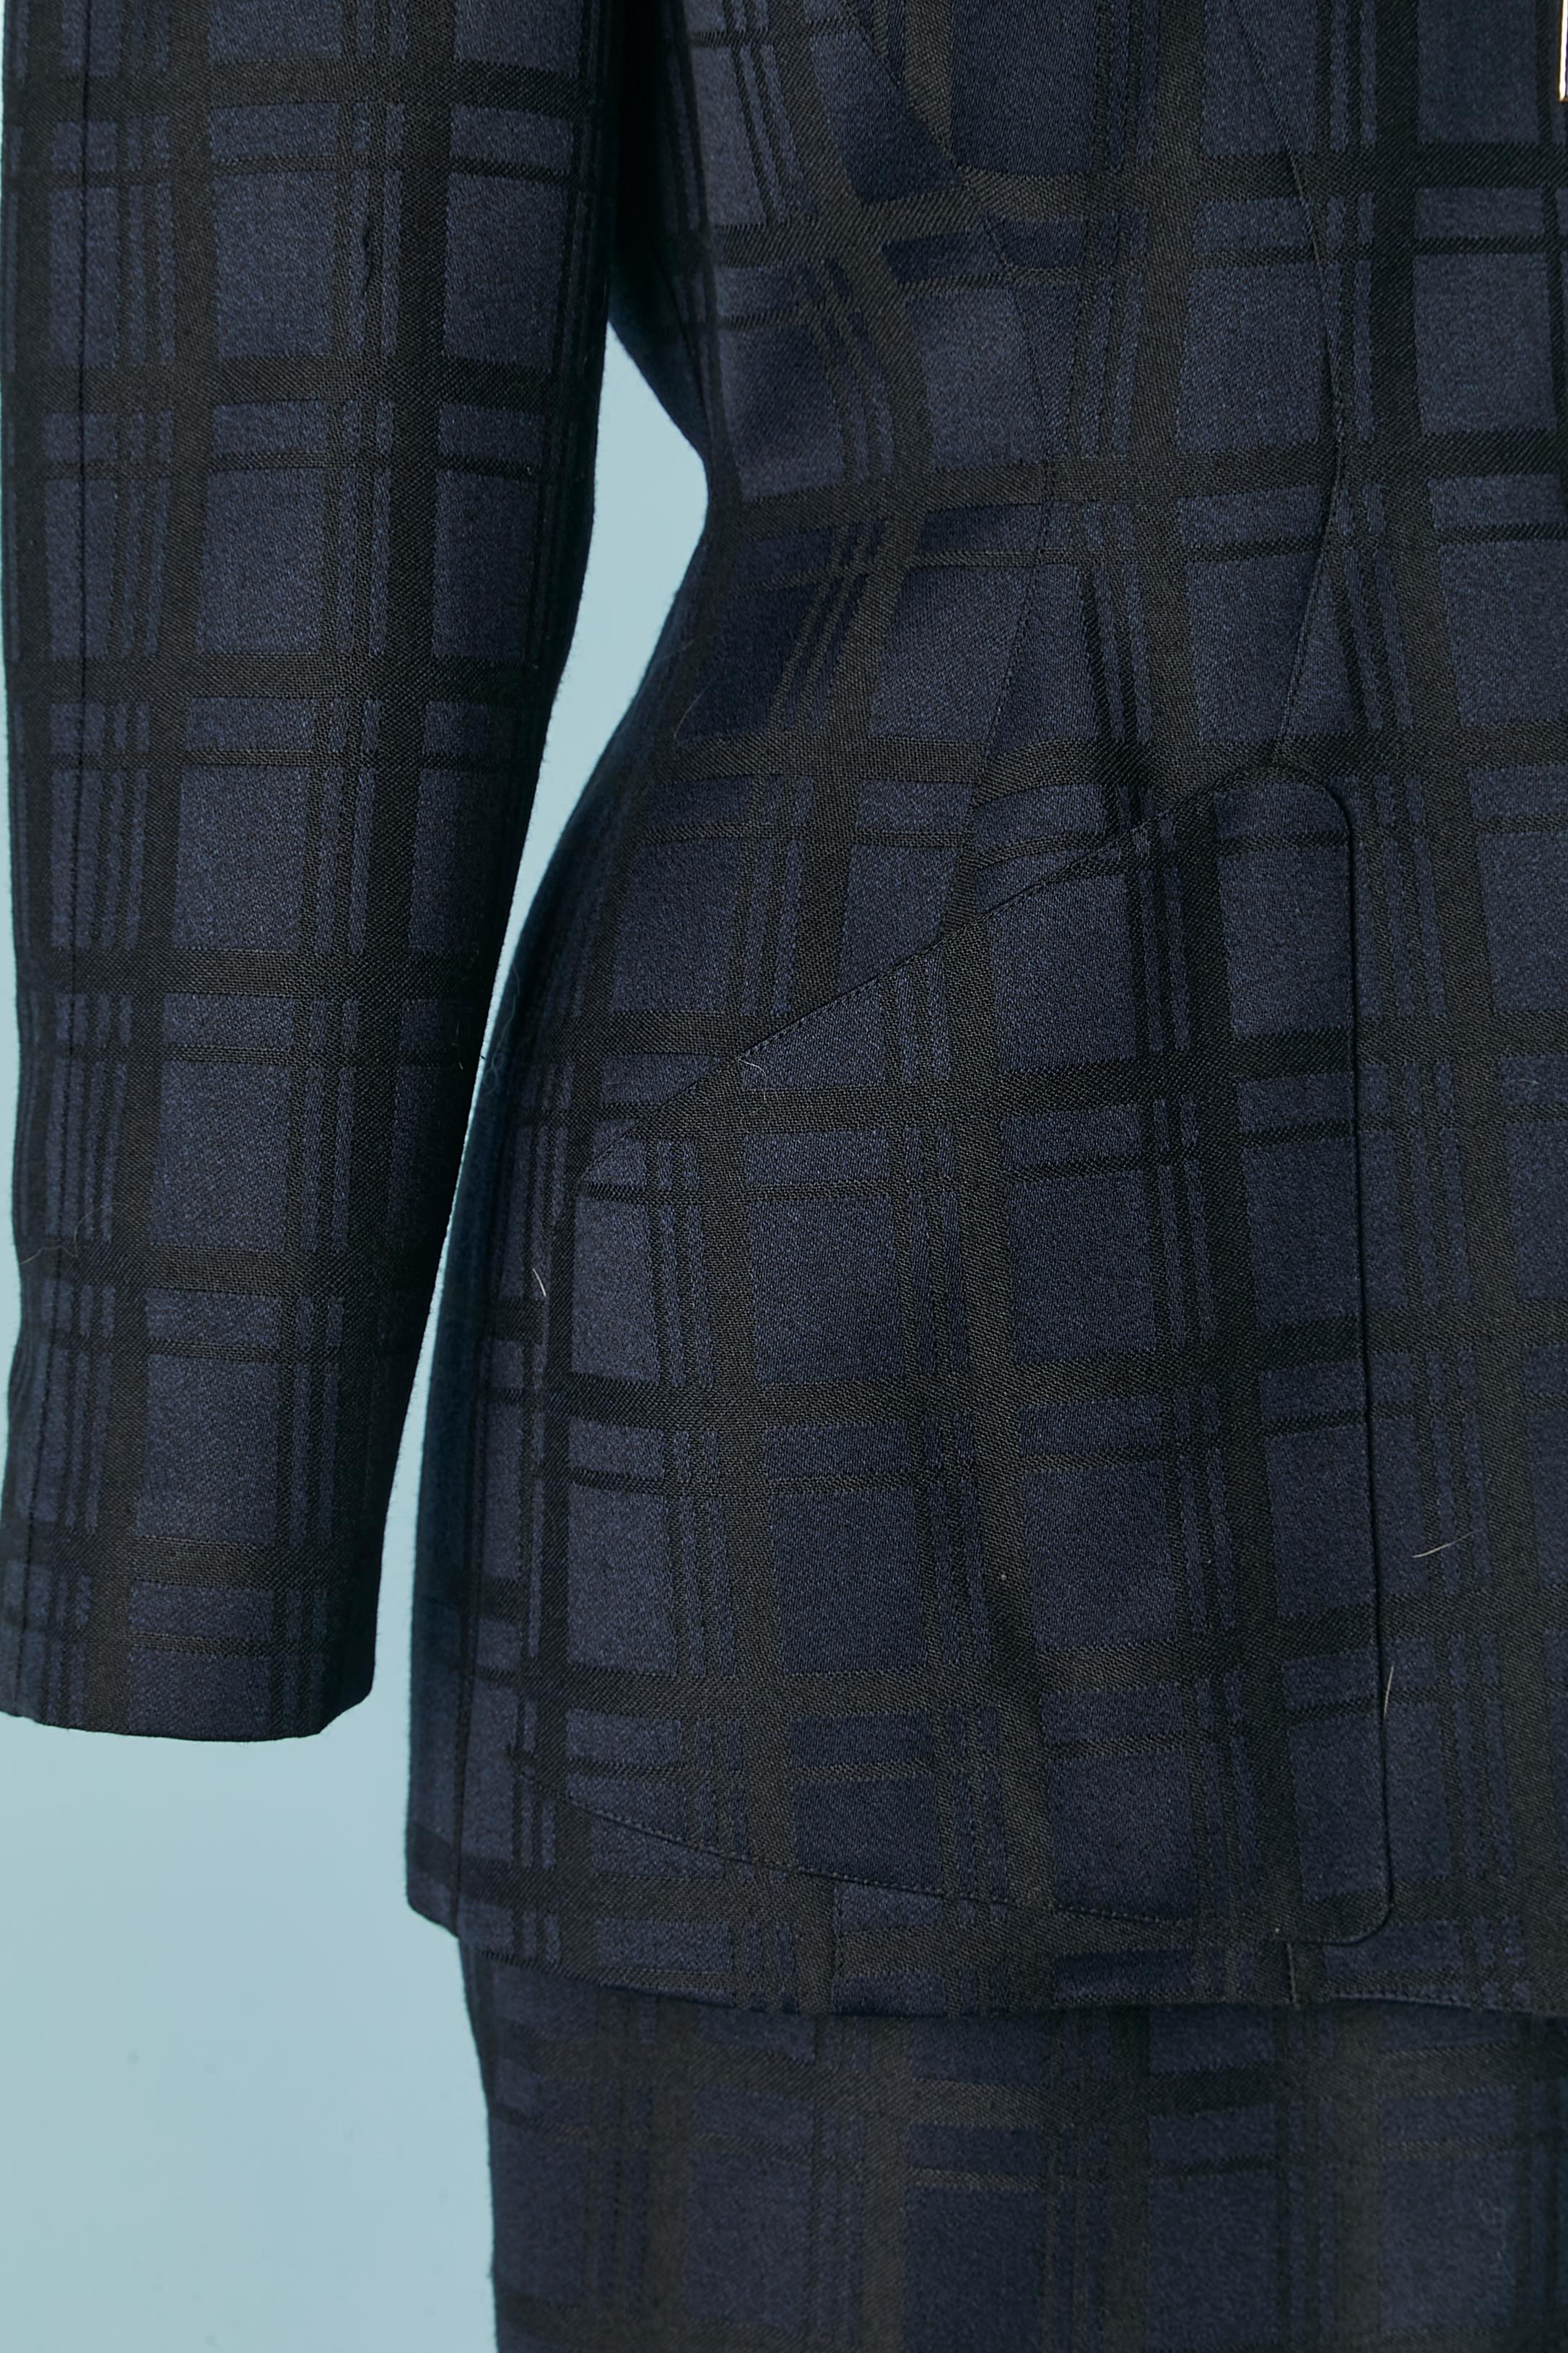 Women's Navy blue and black check pattern jacquard skirt-suit Thierry Mugler Circa 1990 For Sale